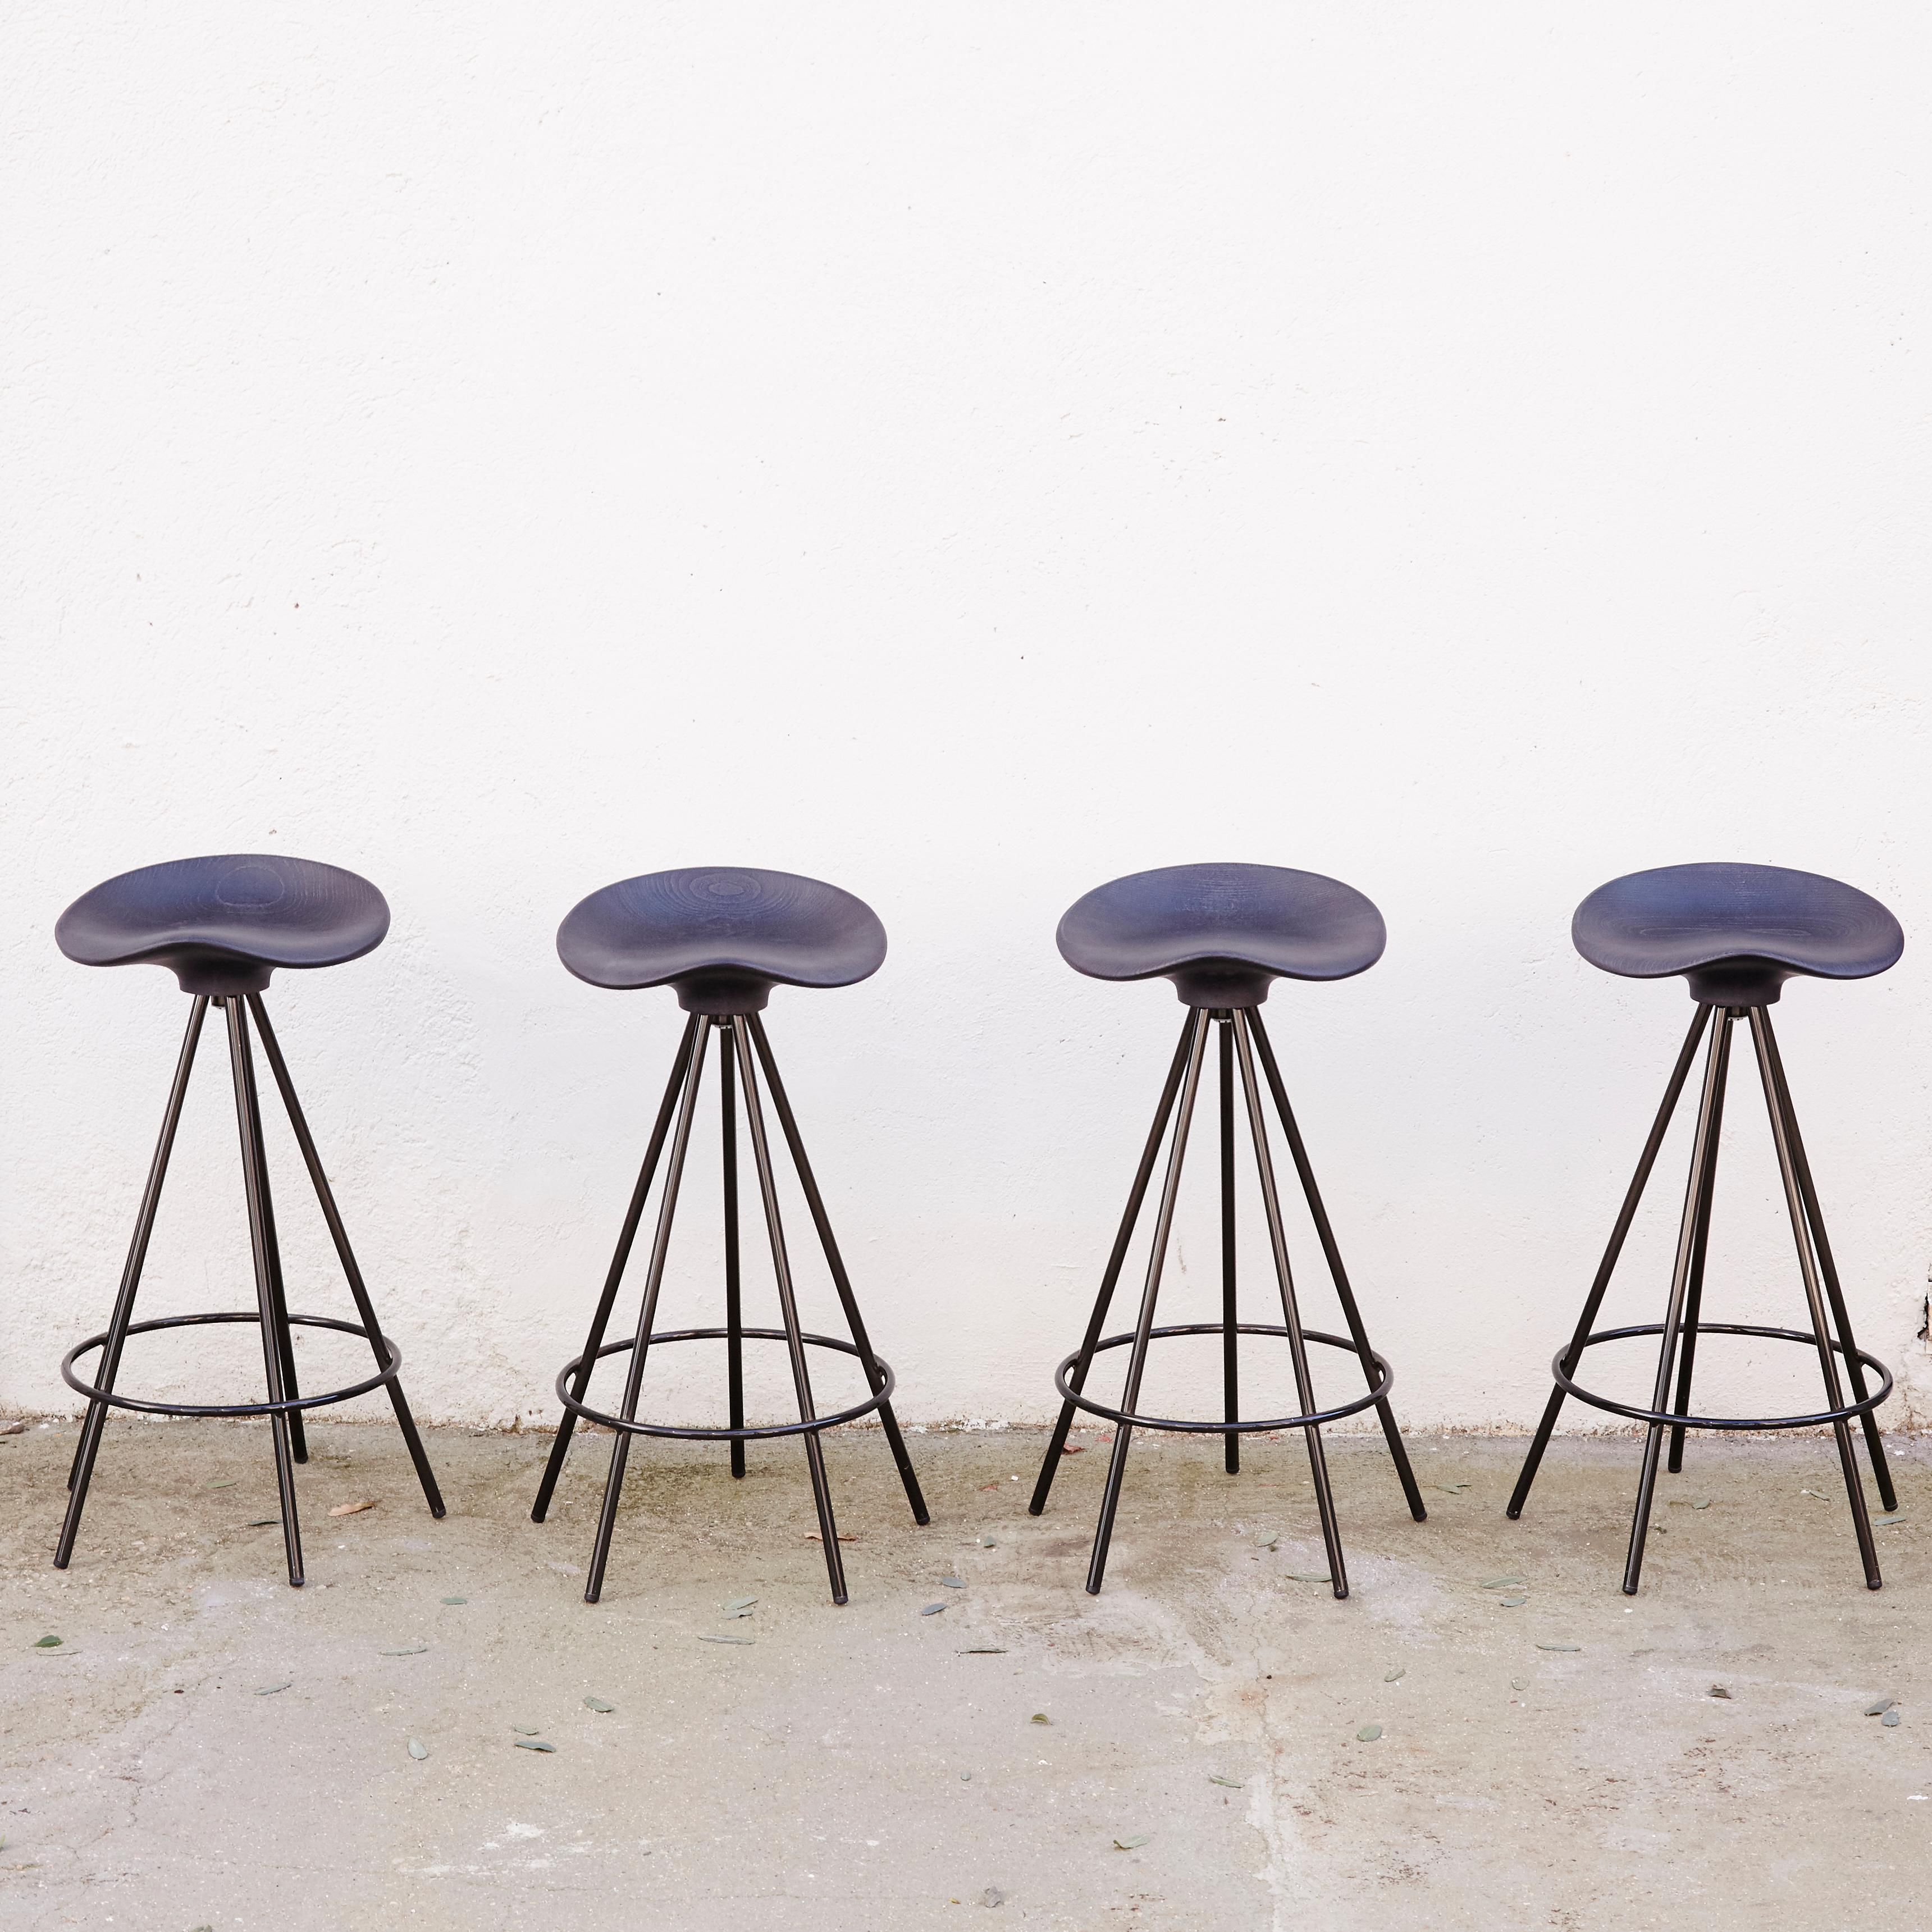 Jamaica stool designed by Pepe Cortes.
Manufactured by BD Barcelona.

The Jamaica stool is already a Classic in Spanish design and is one of the best designed stools in all history. It’s been on the market for over 25 years and remains as current